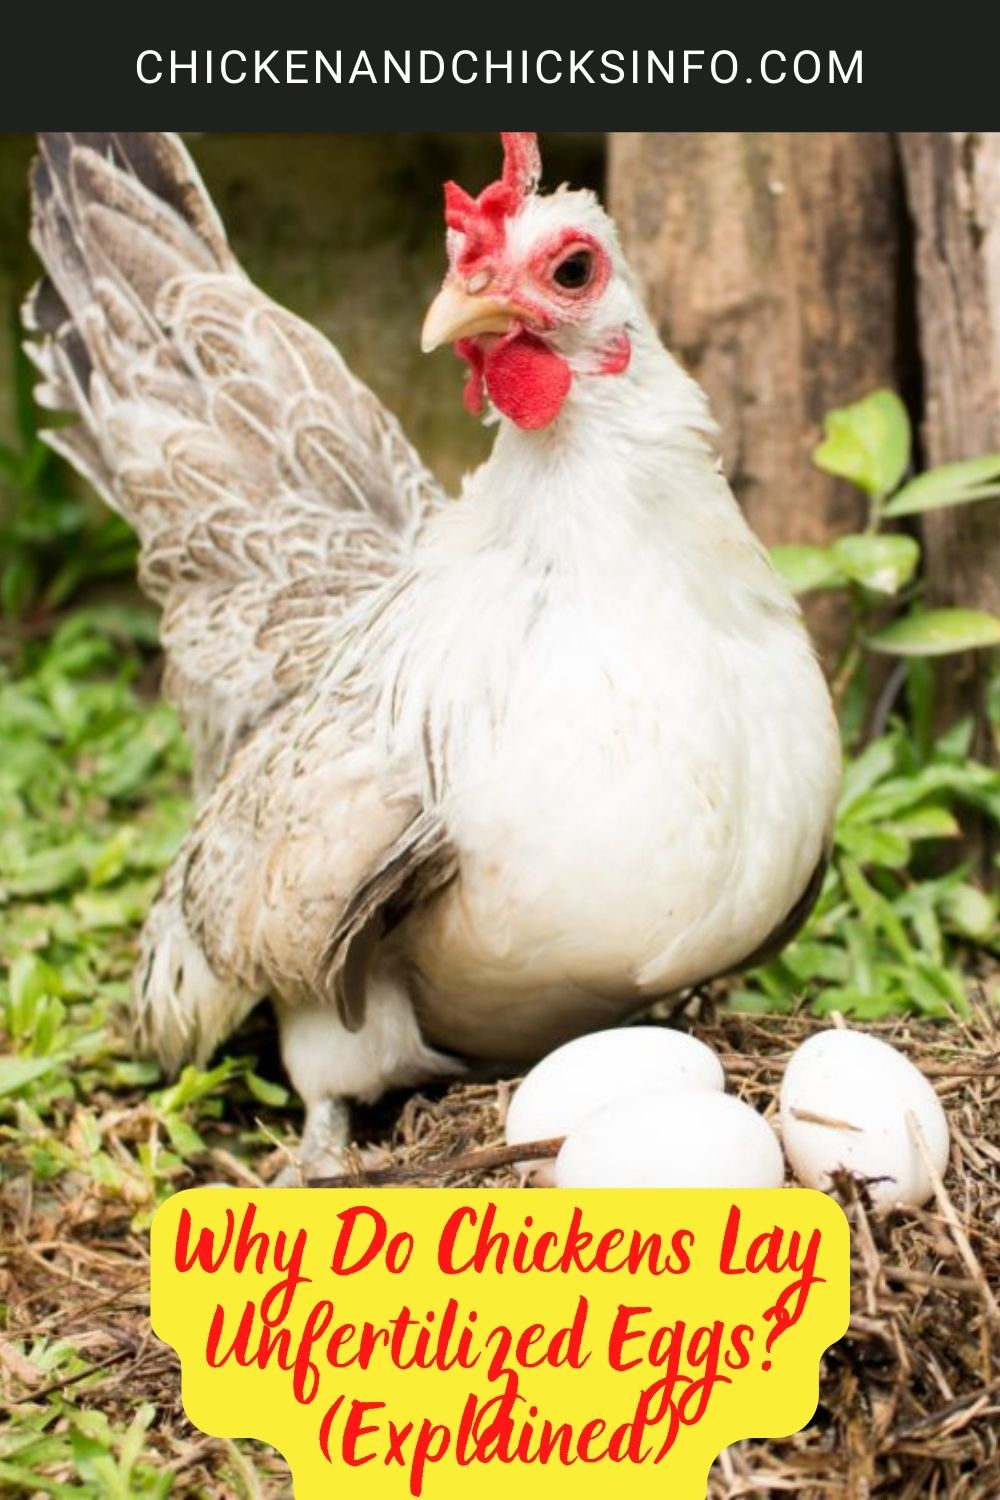 Why Do Chickens Lay Unfertilized Eggs? poster.